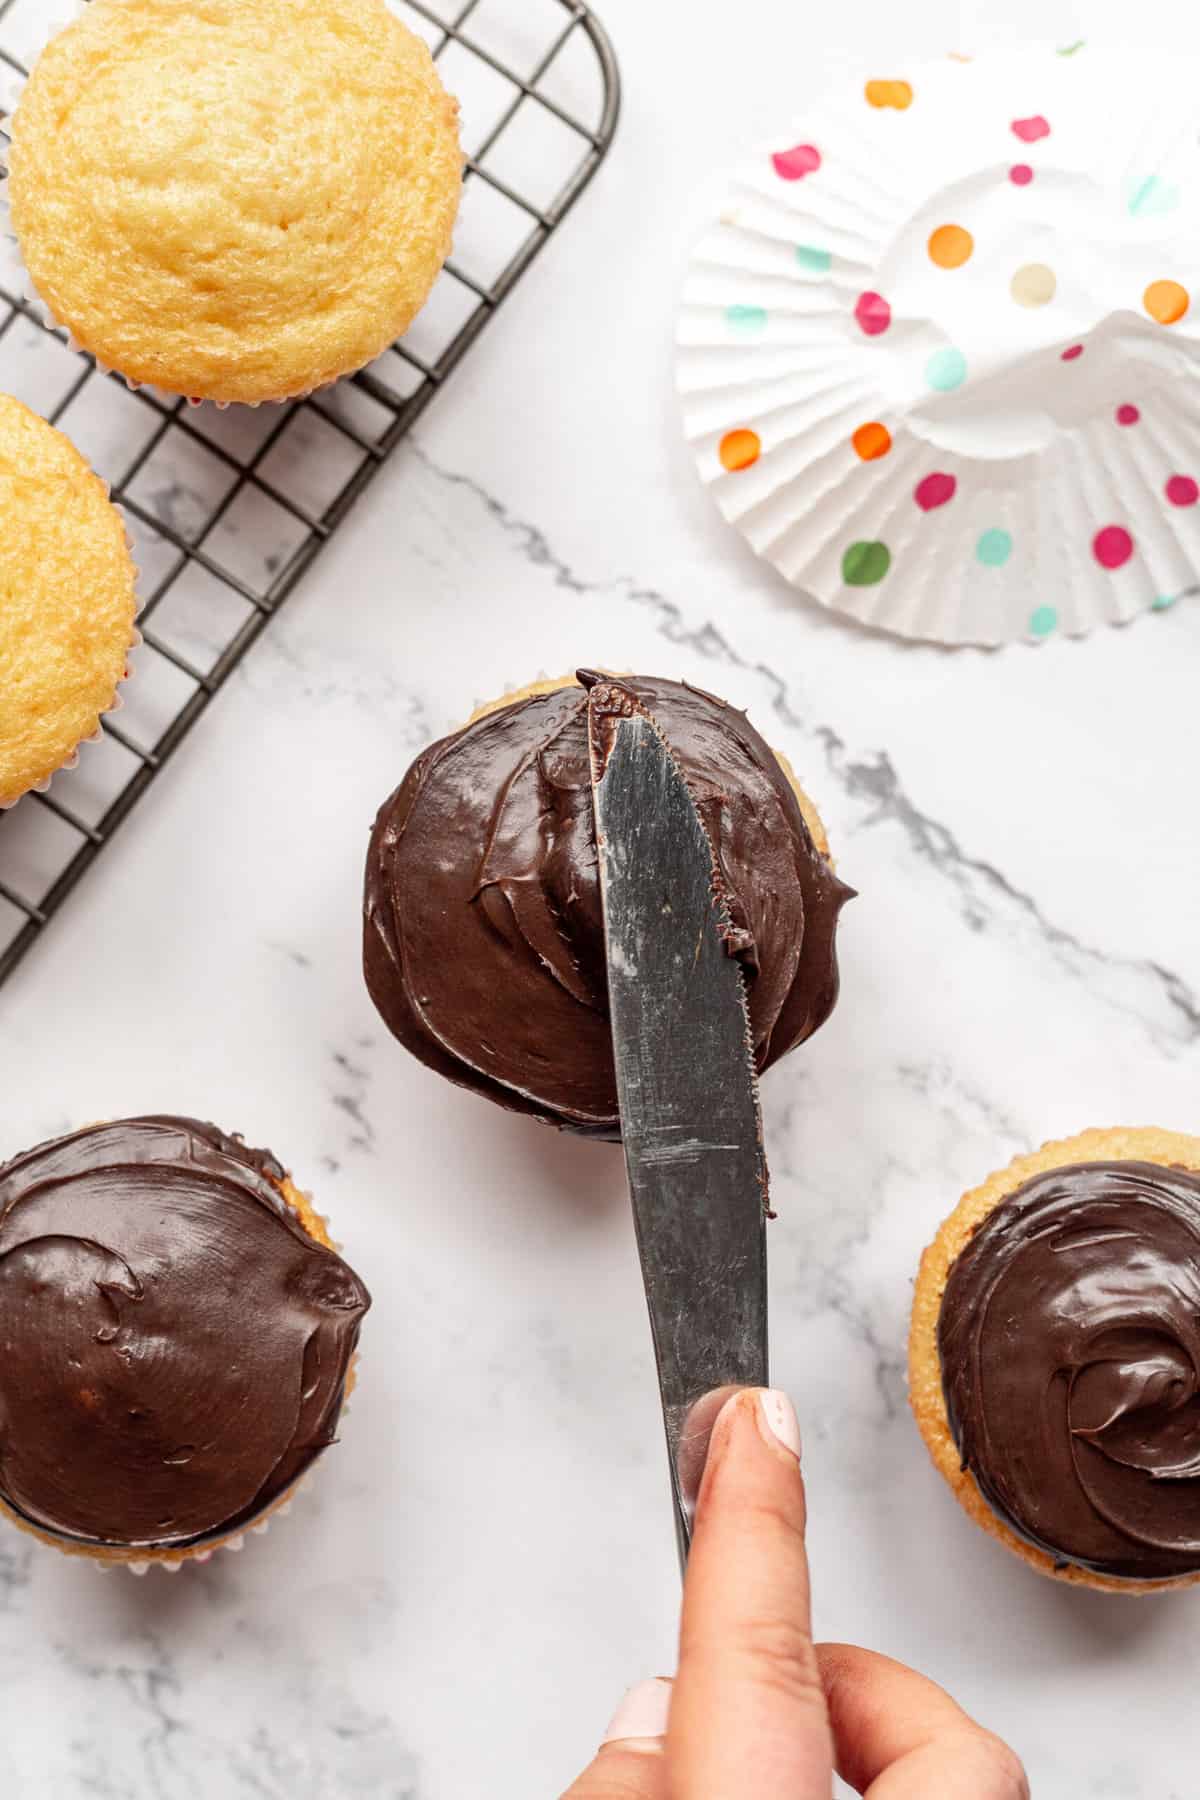 using a knife to spread chocolate frosting onto vanilla cupcakes